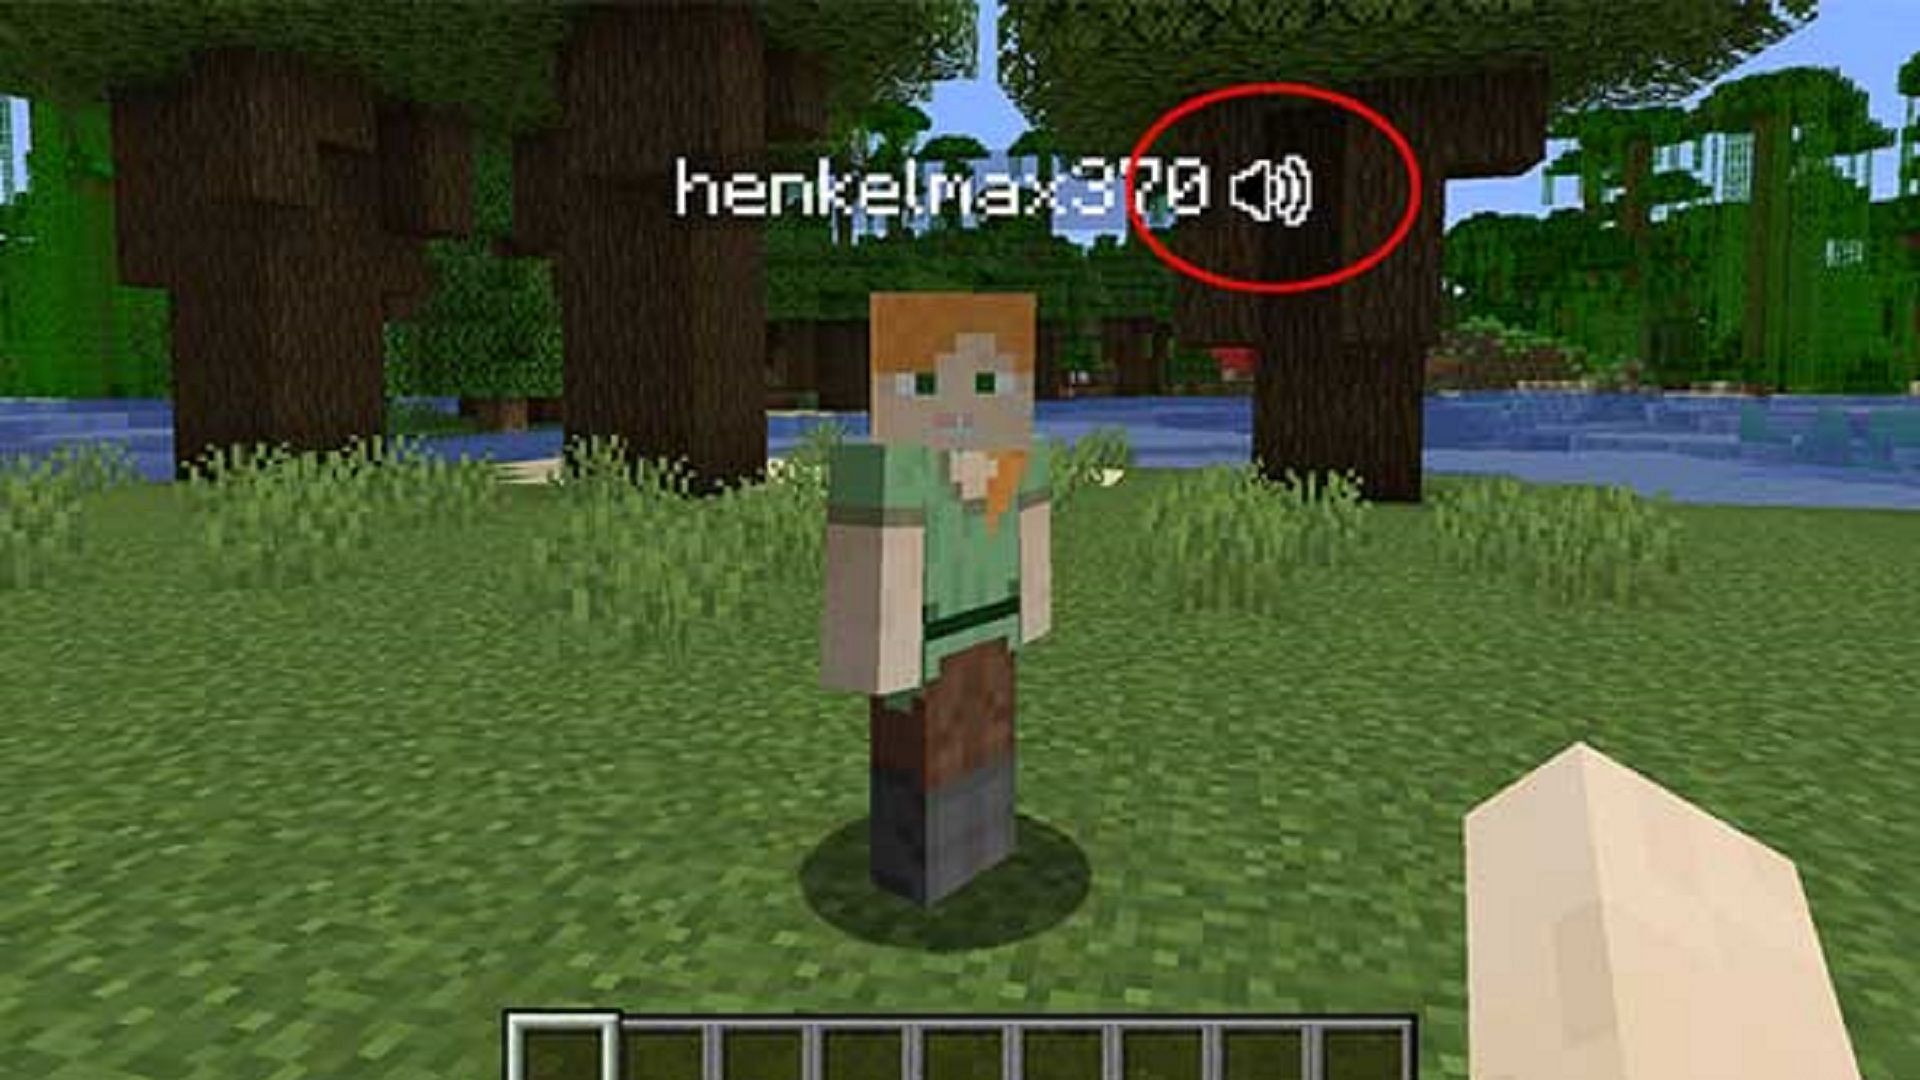 An indicator from the mod showing a player is speaking (Image via Minecraftings)